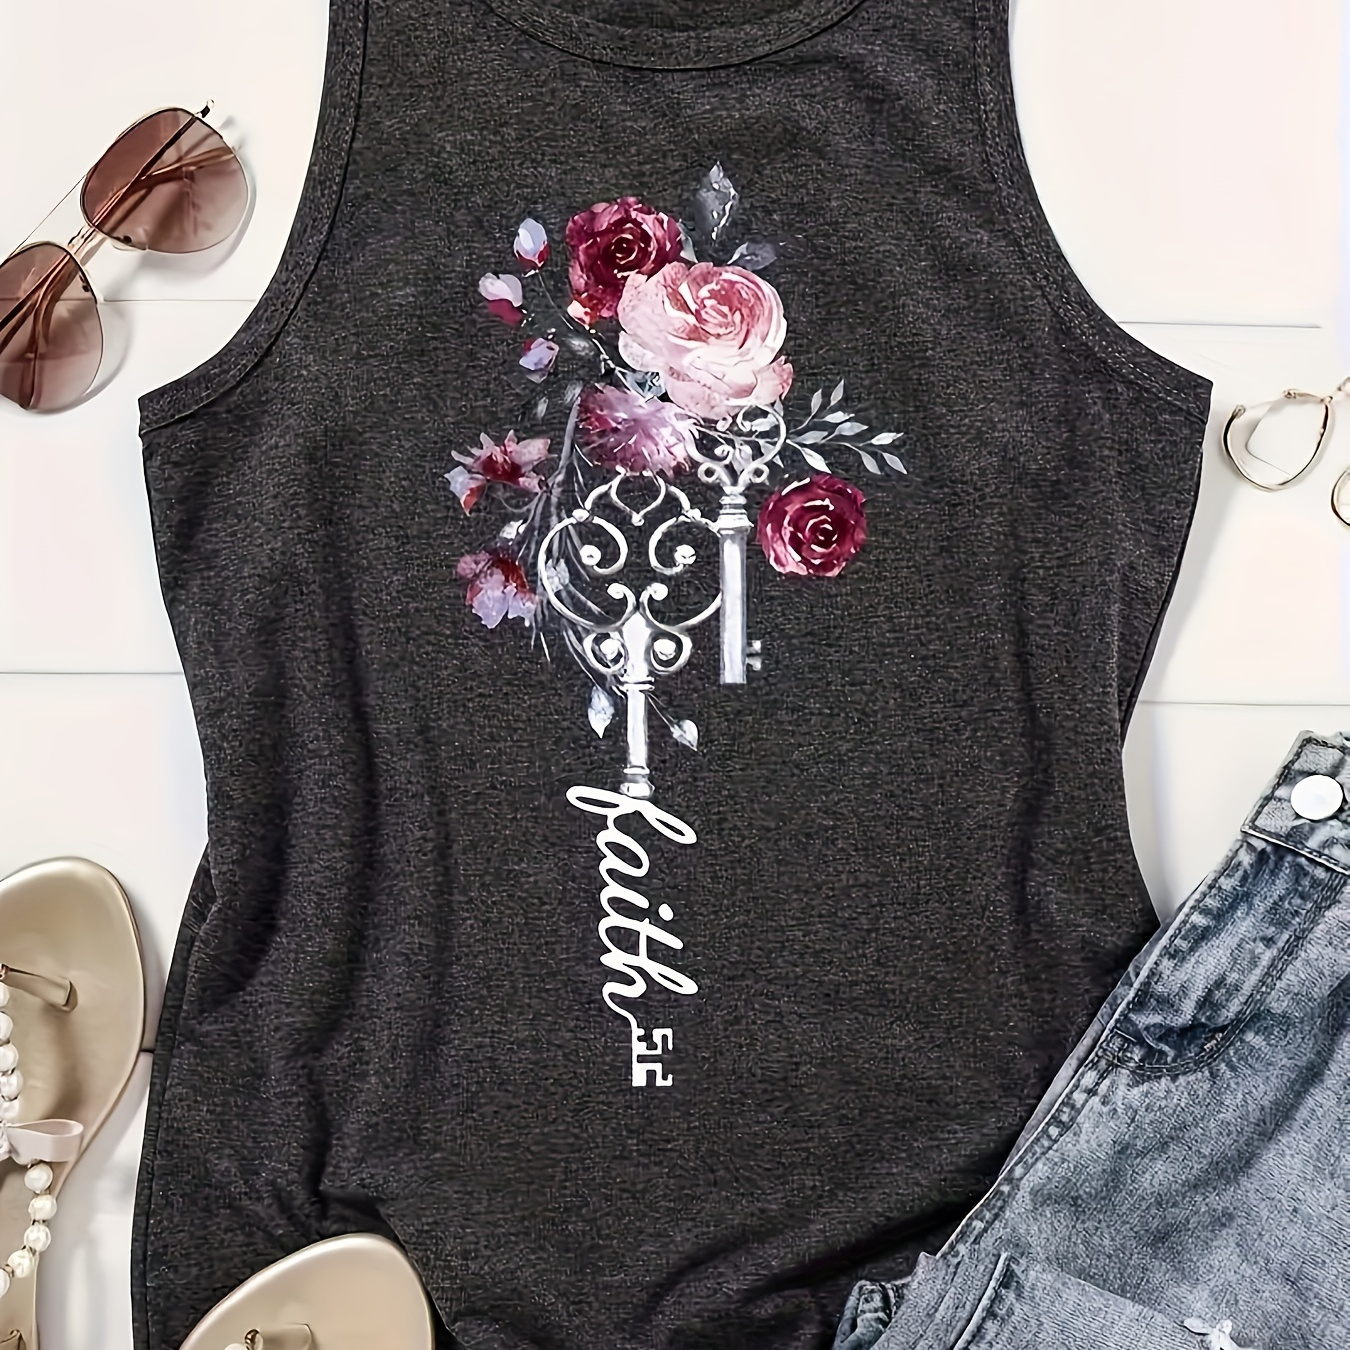 

Graphic Print Tank Top, Sleeveless Casual Top For Summer & Spring, Women's Clothing